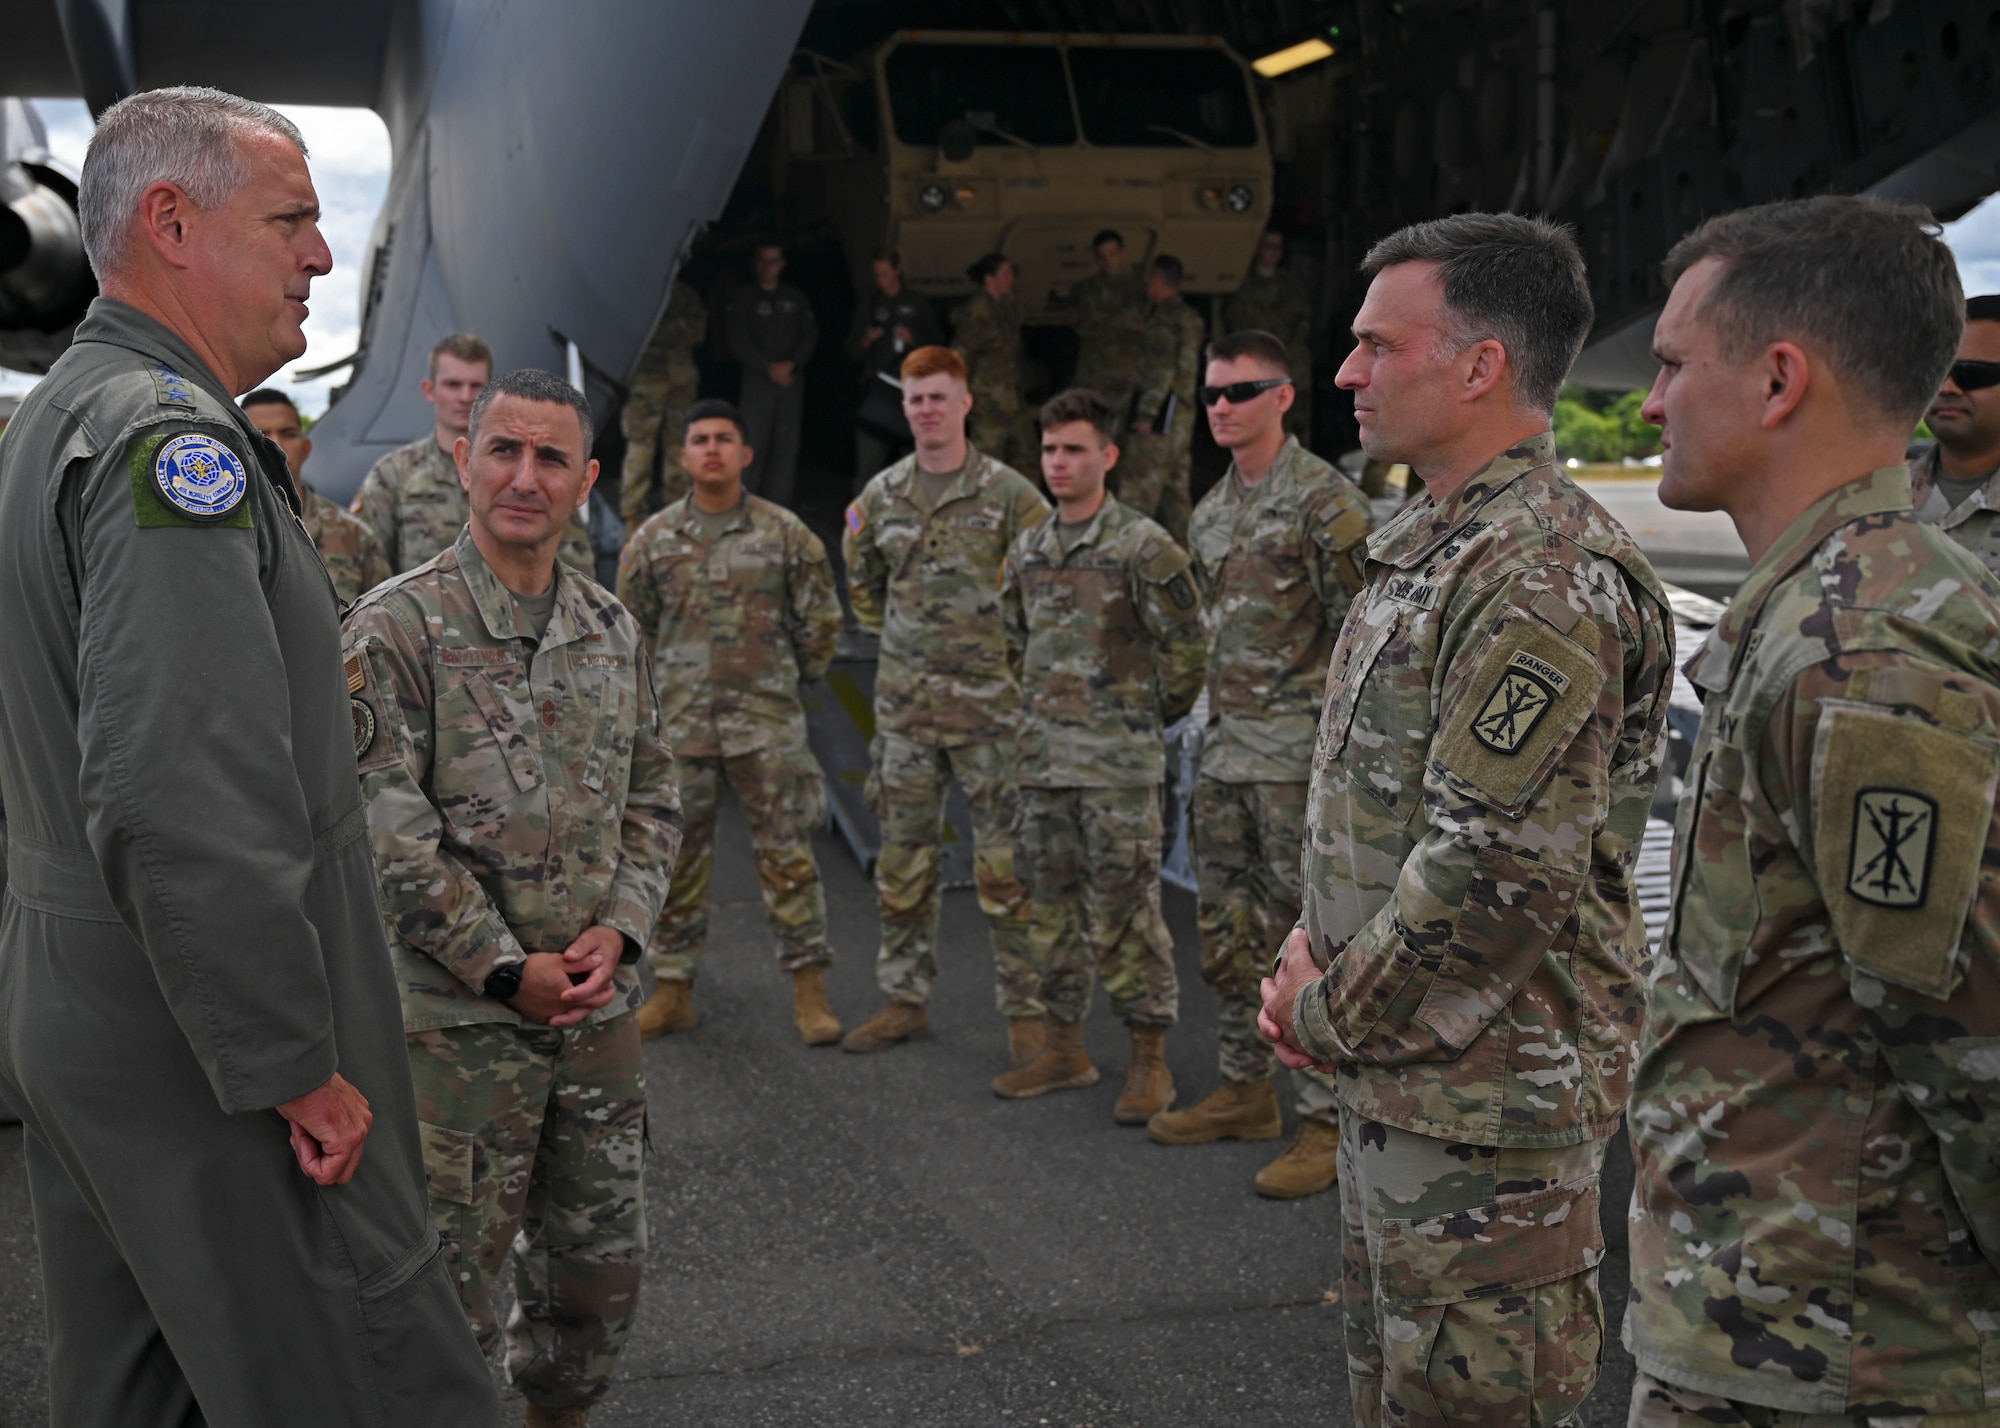 U.S. Air Force Gen. Mike Minihan, left, Air Mobility Command commander, and Chief Master Sgt. Brian Kruzelnick, AMC command chief, speak with U.S. Soldiers from the 17th Field Artillery Brigade at Joint Base Lewis-McChord, Washington, July 7, 2022. Minihan and Kruzelnick spent two days experiencing the mission, priorities and joint operations of America’s Airlift Wing. (U.S. Air Force photo by Senior Airman Callie Norton)